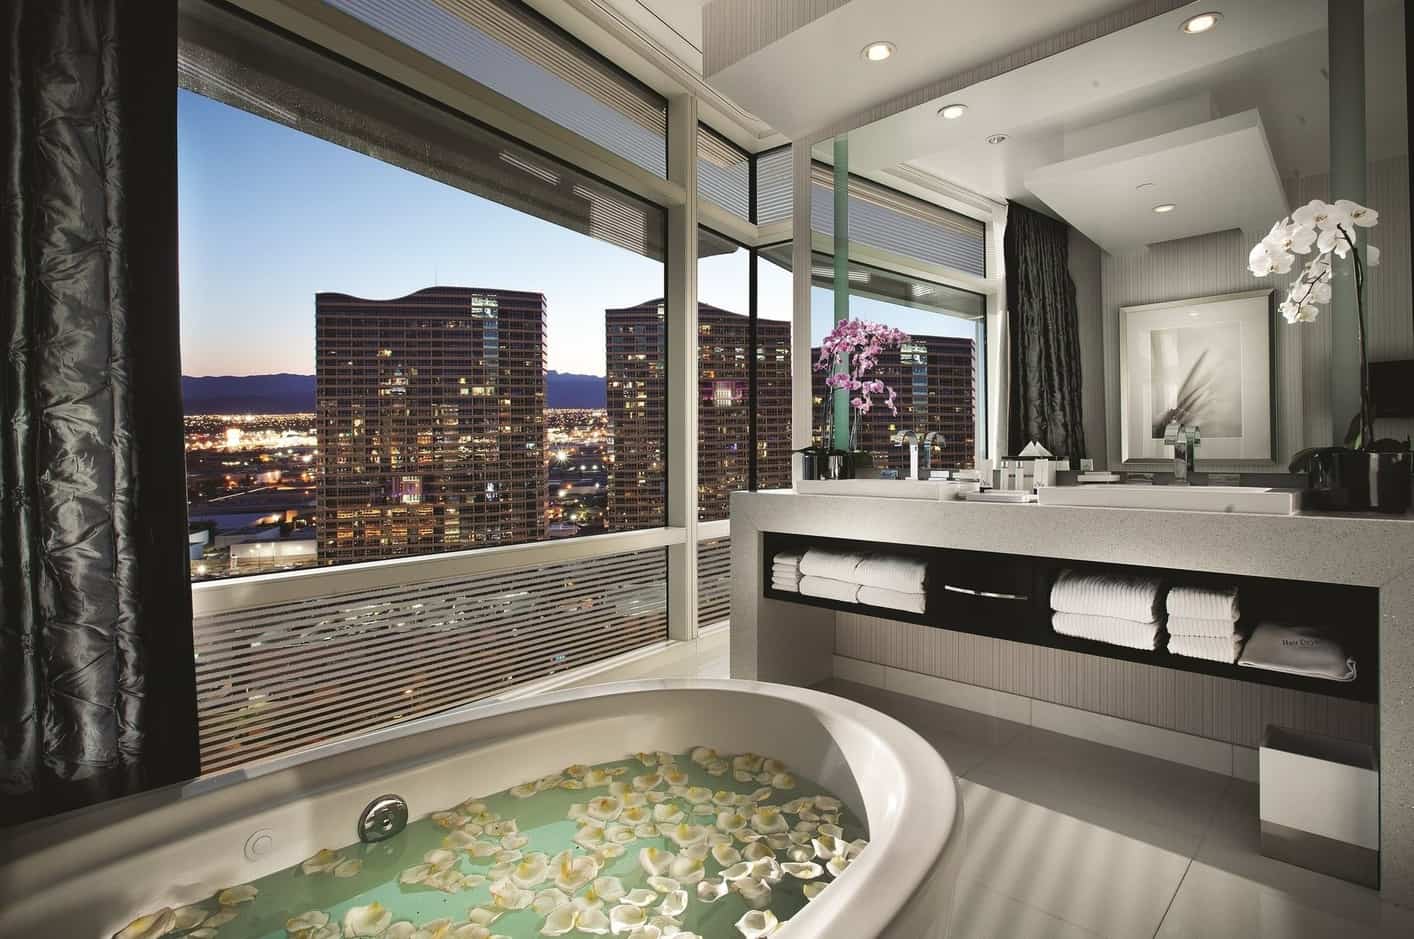 ARIA Resort & Casino, what hotels have a hot tub in the room